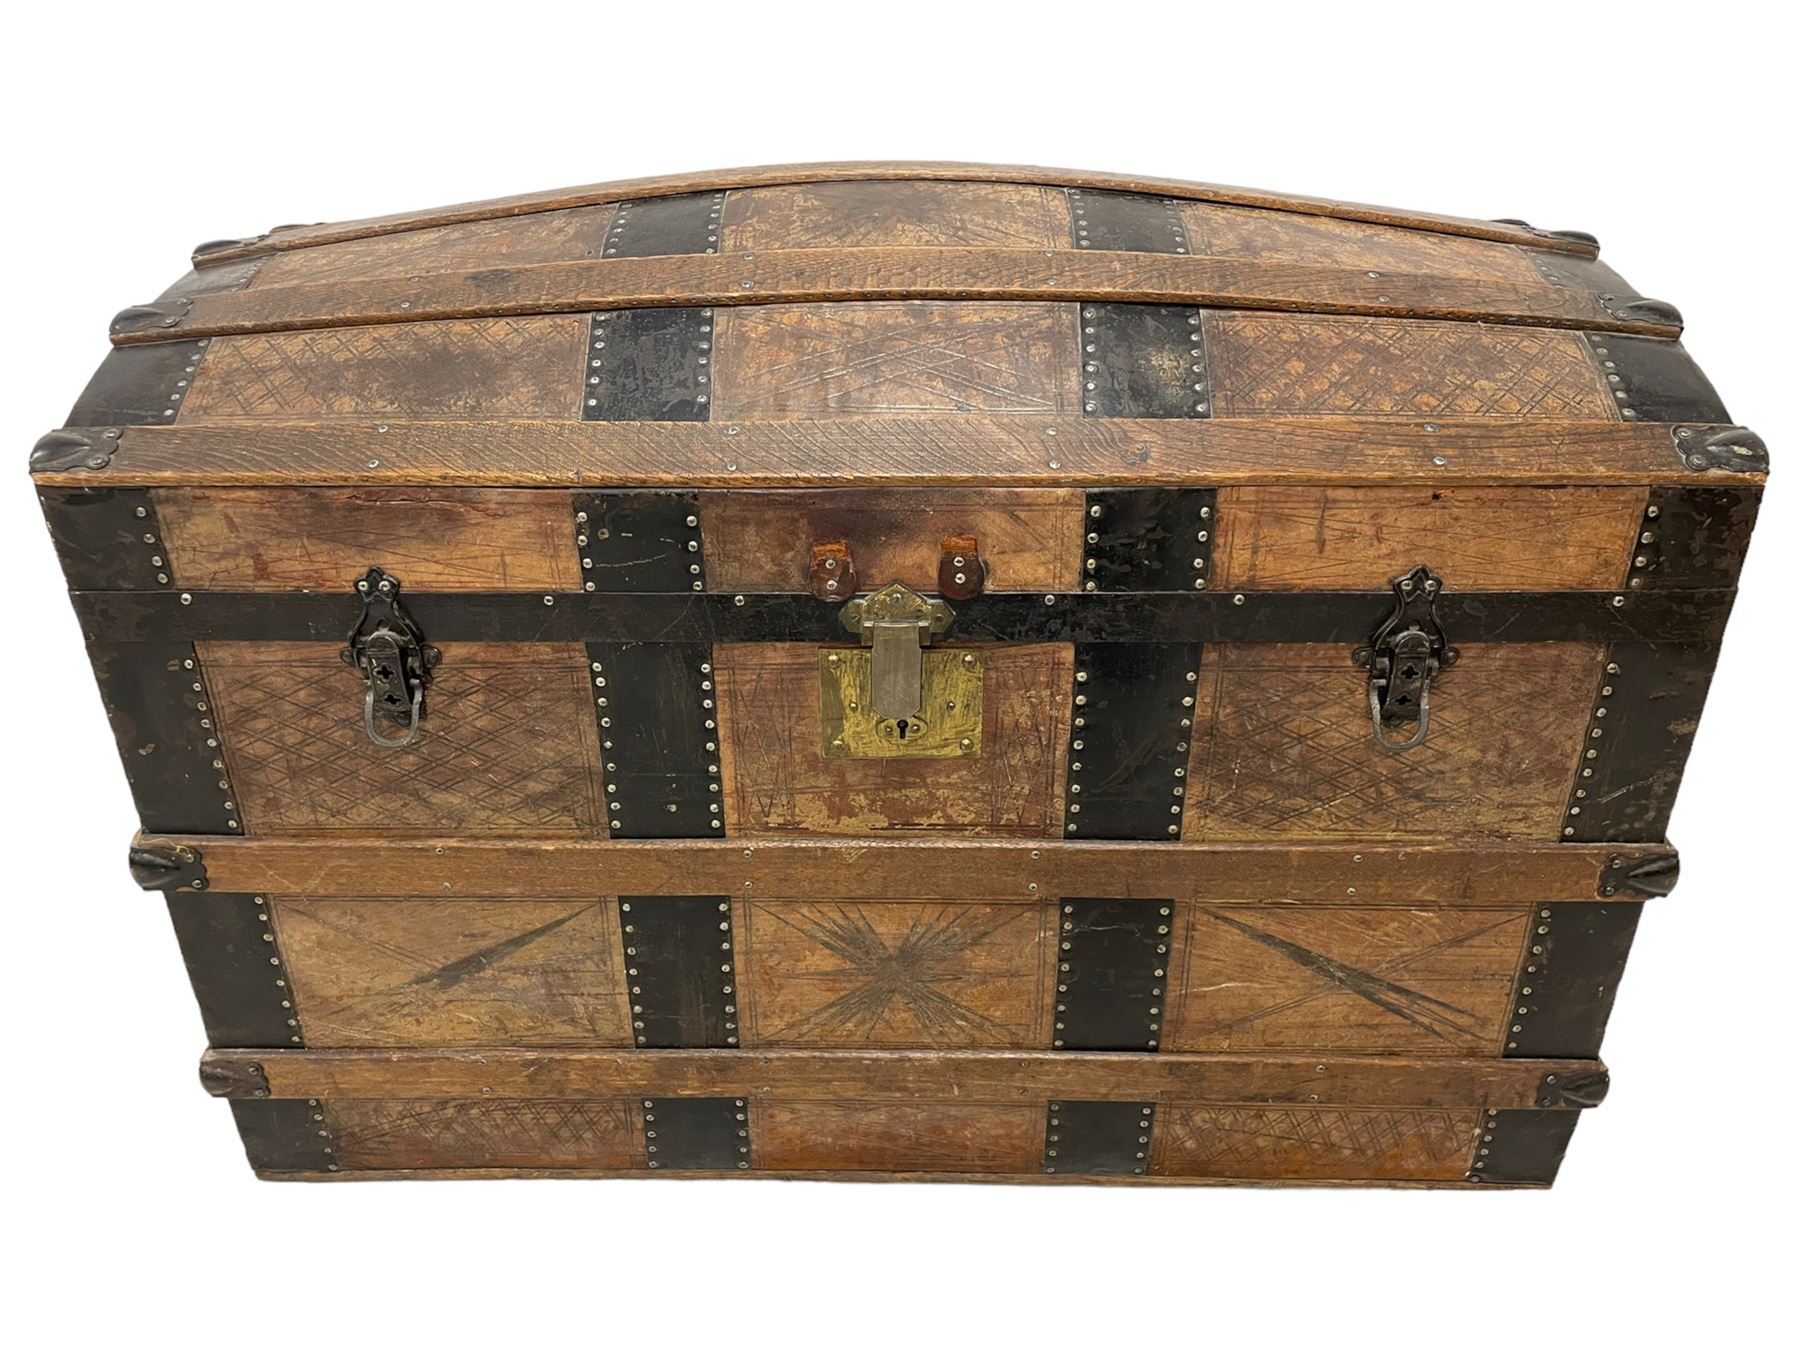 Victorian leather bound travelling trunk - Image 4 of 8